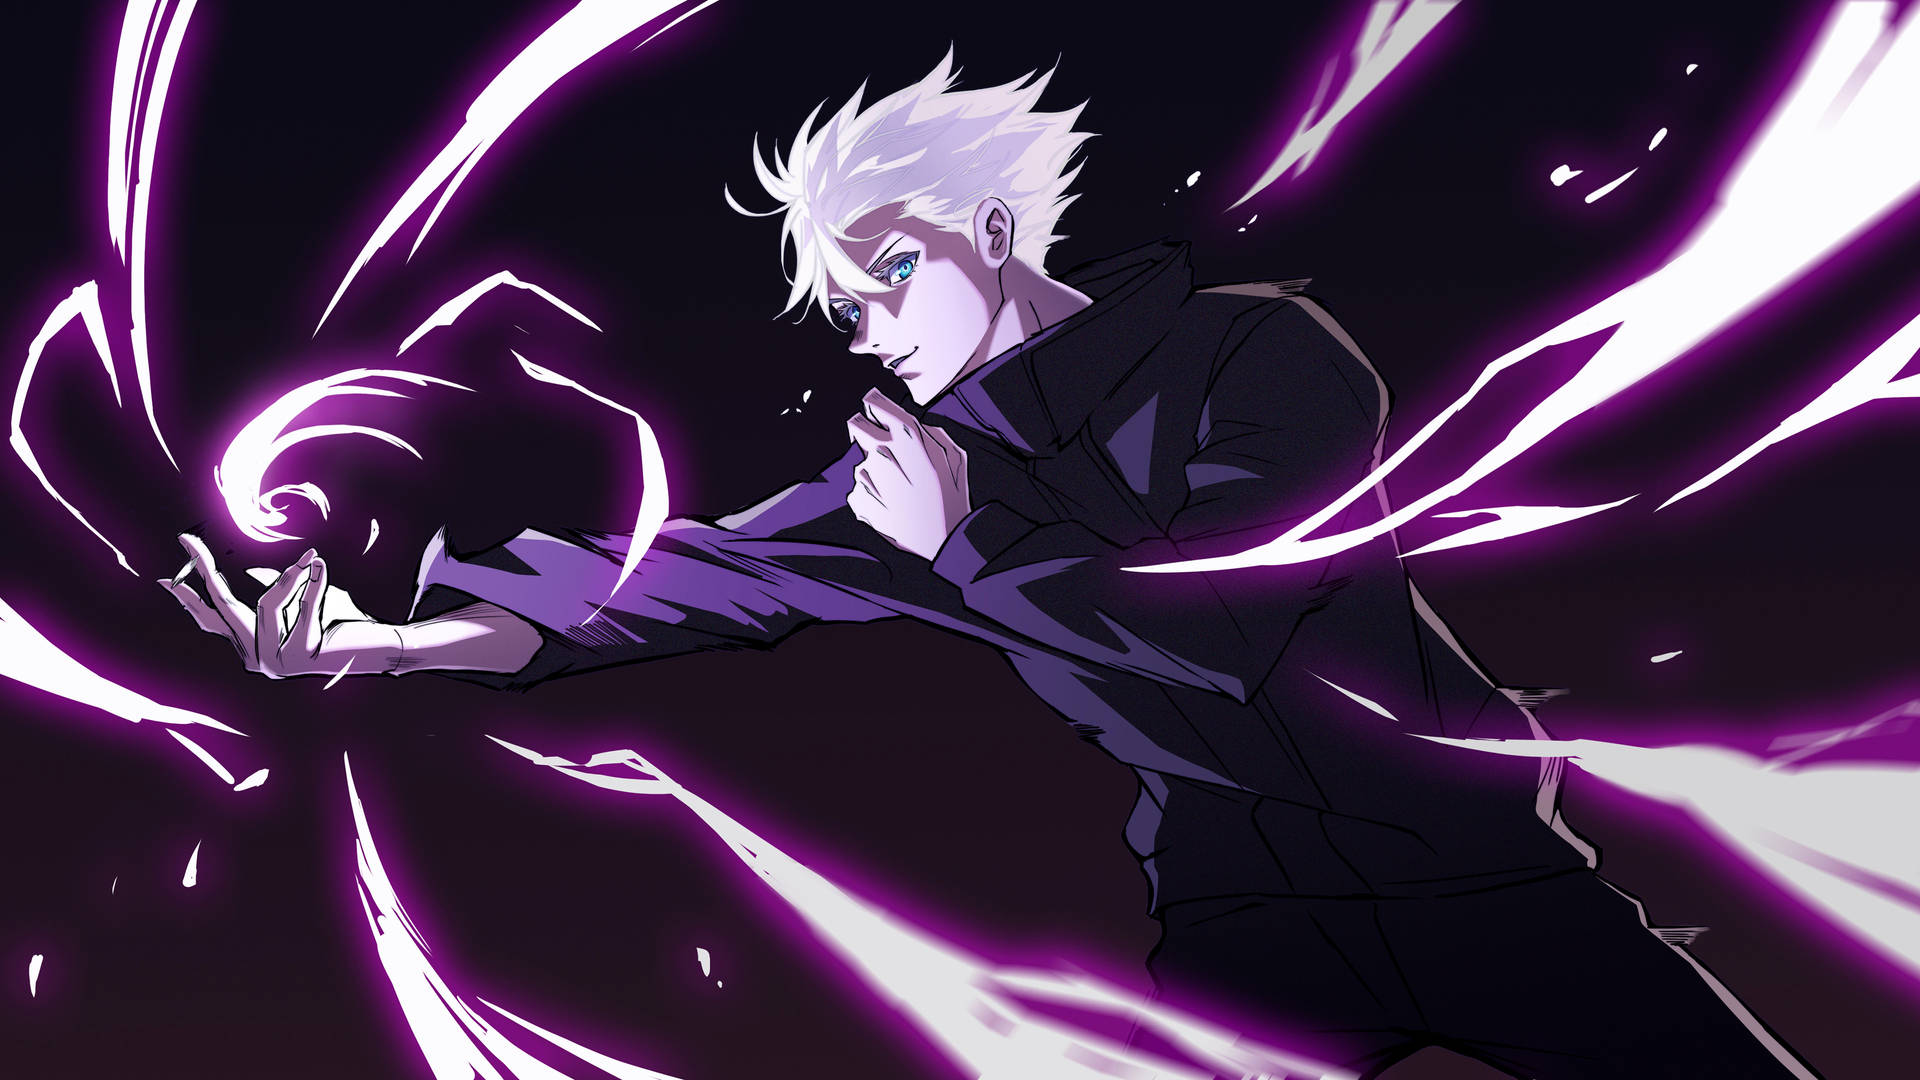 A Man With White Hair And Purple Lights Wallpaper